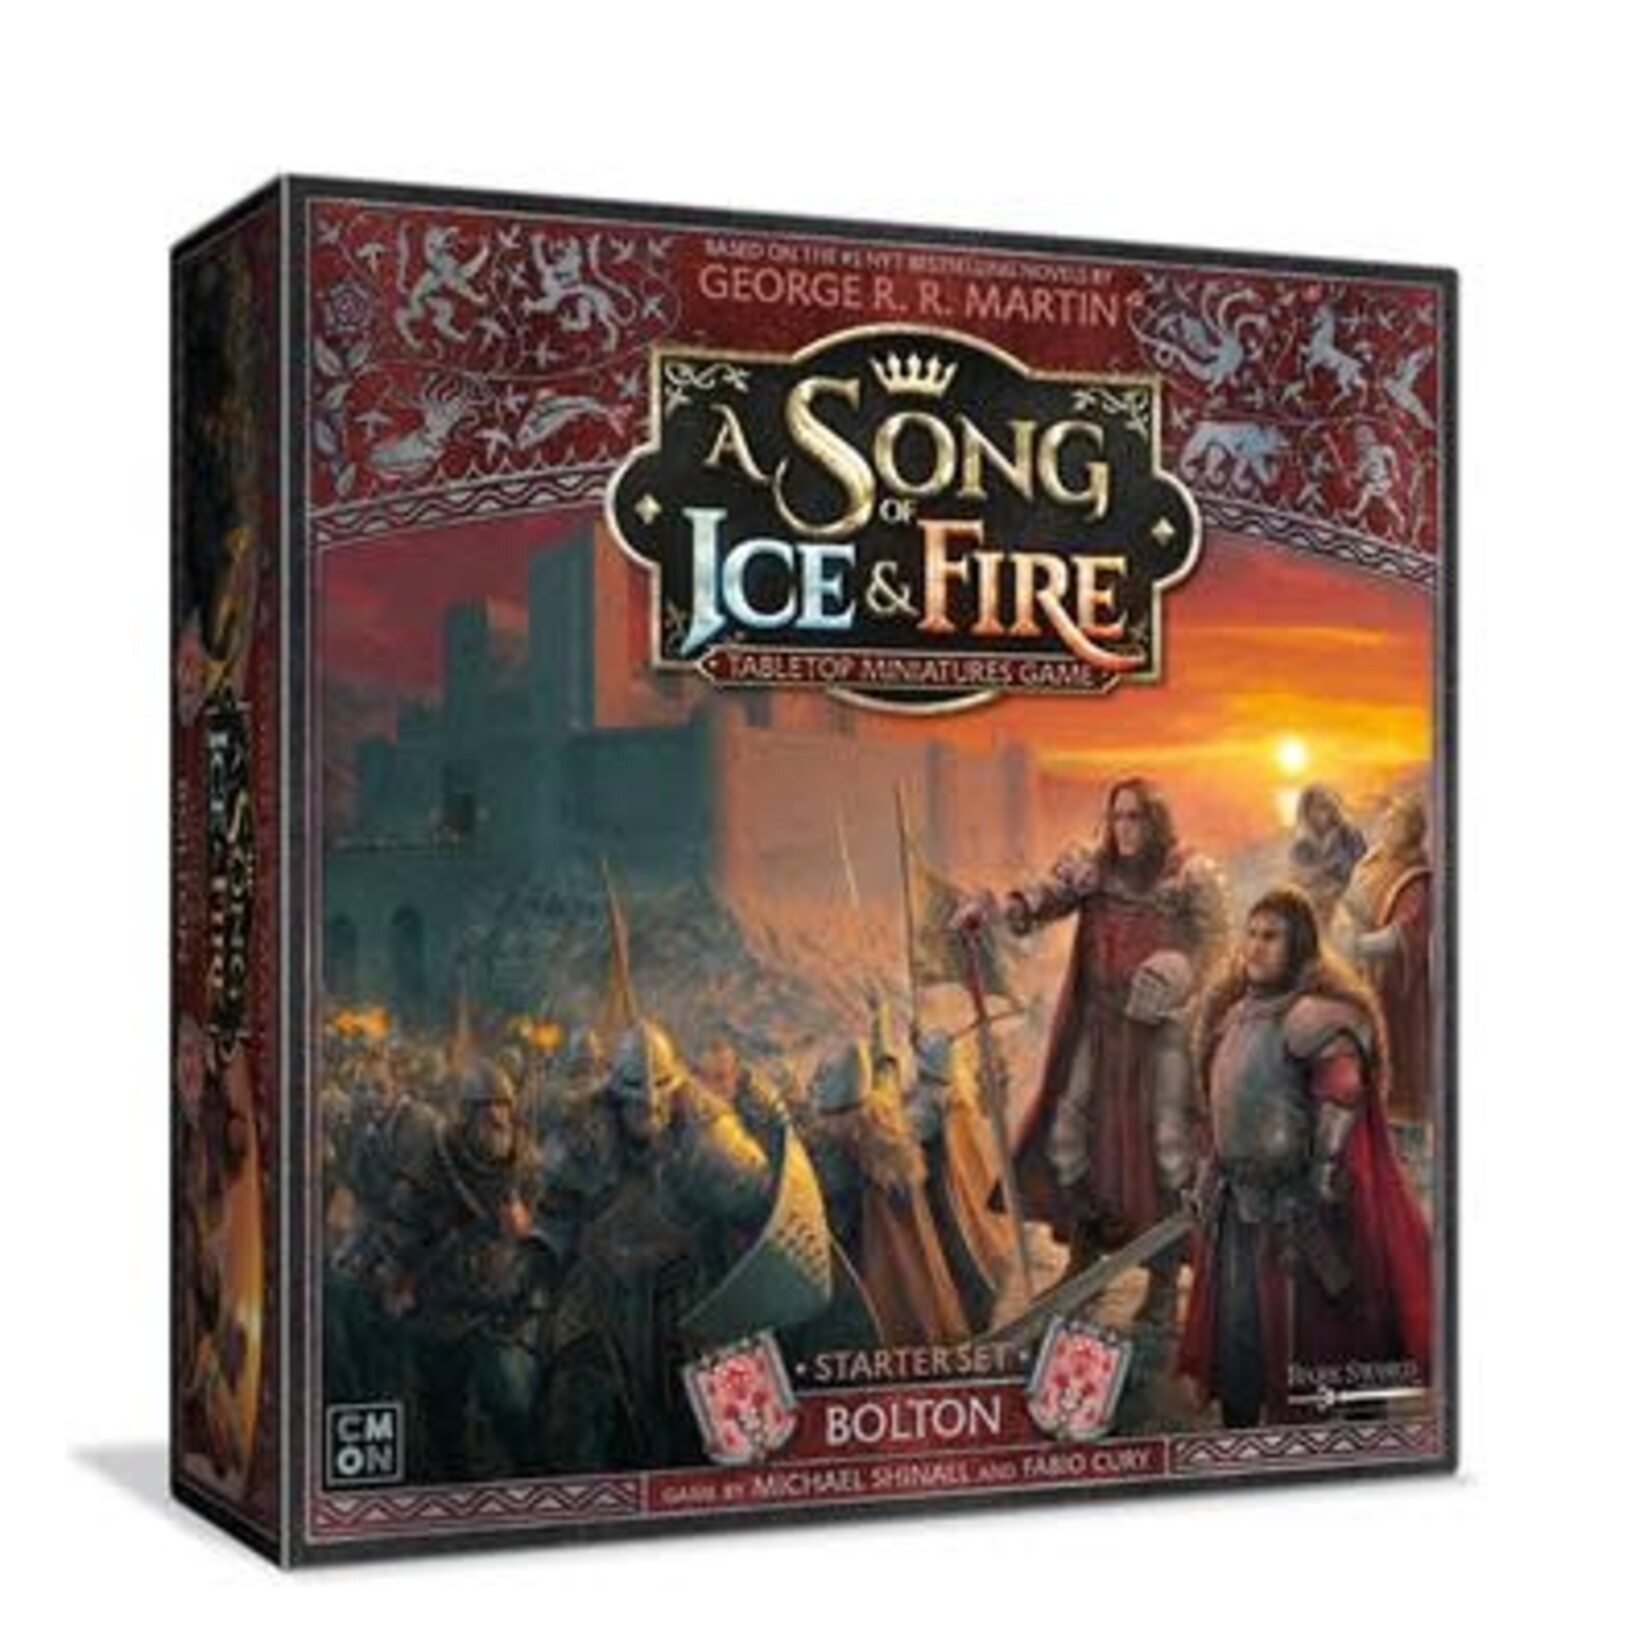 A Song of Ice and Fire Bolton Starter Set